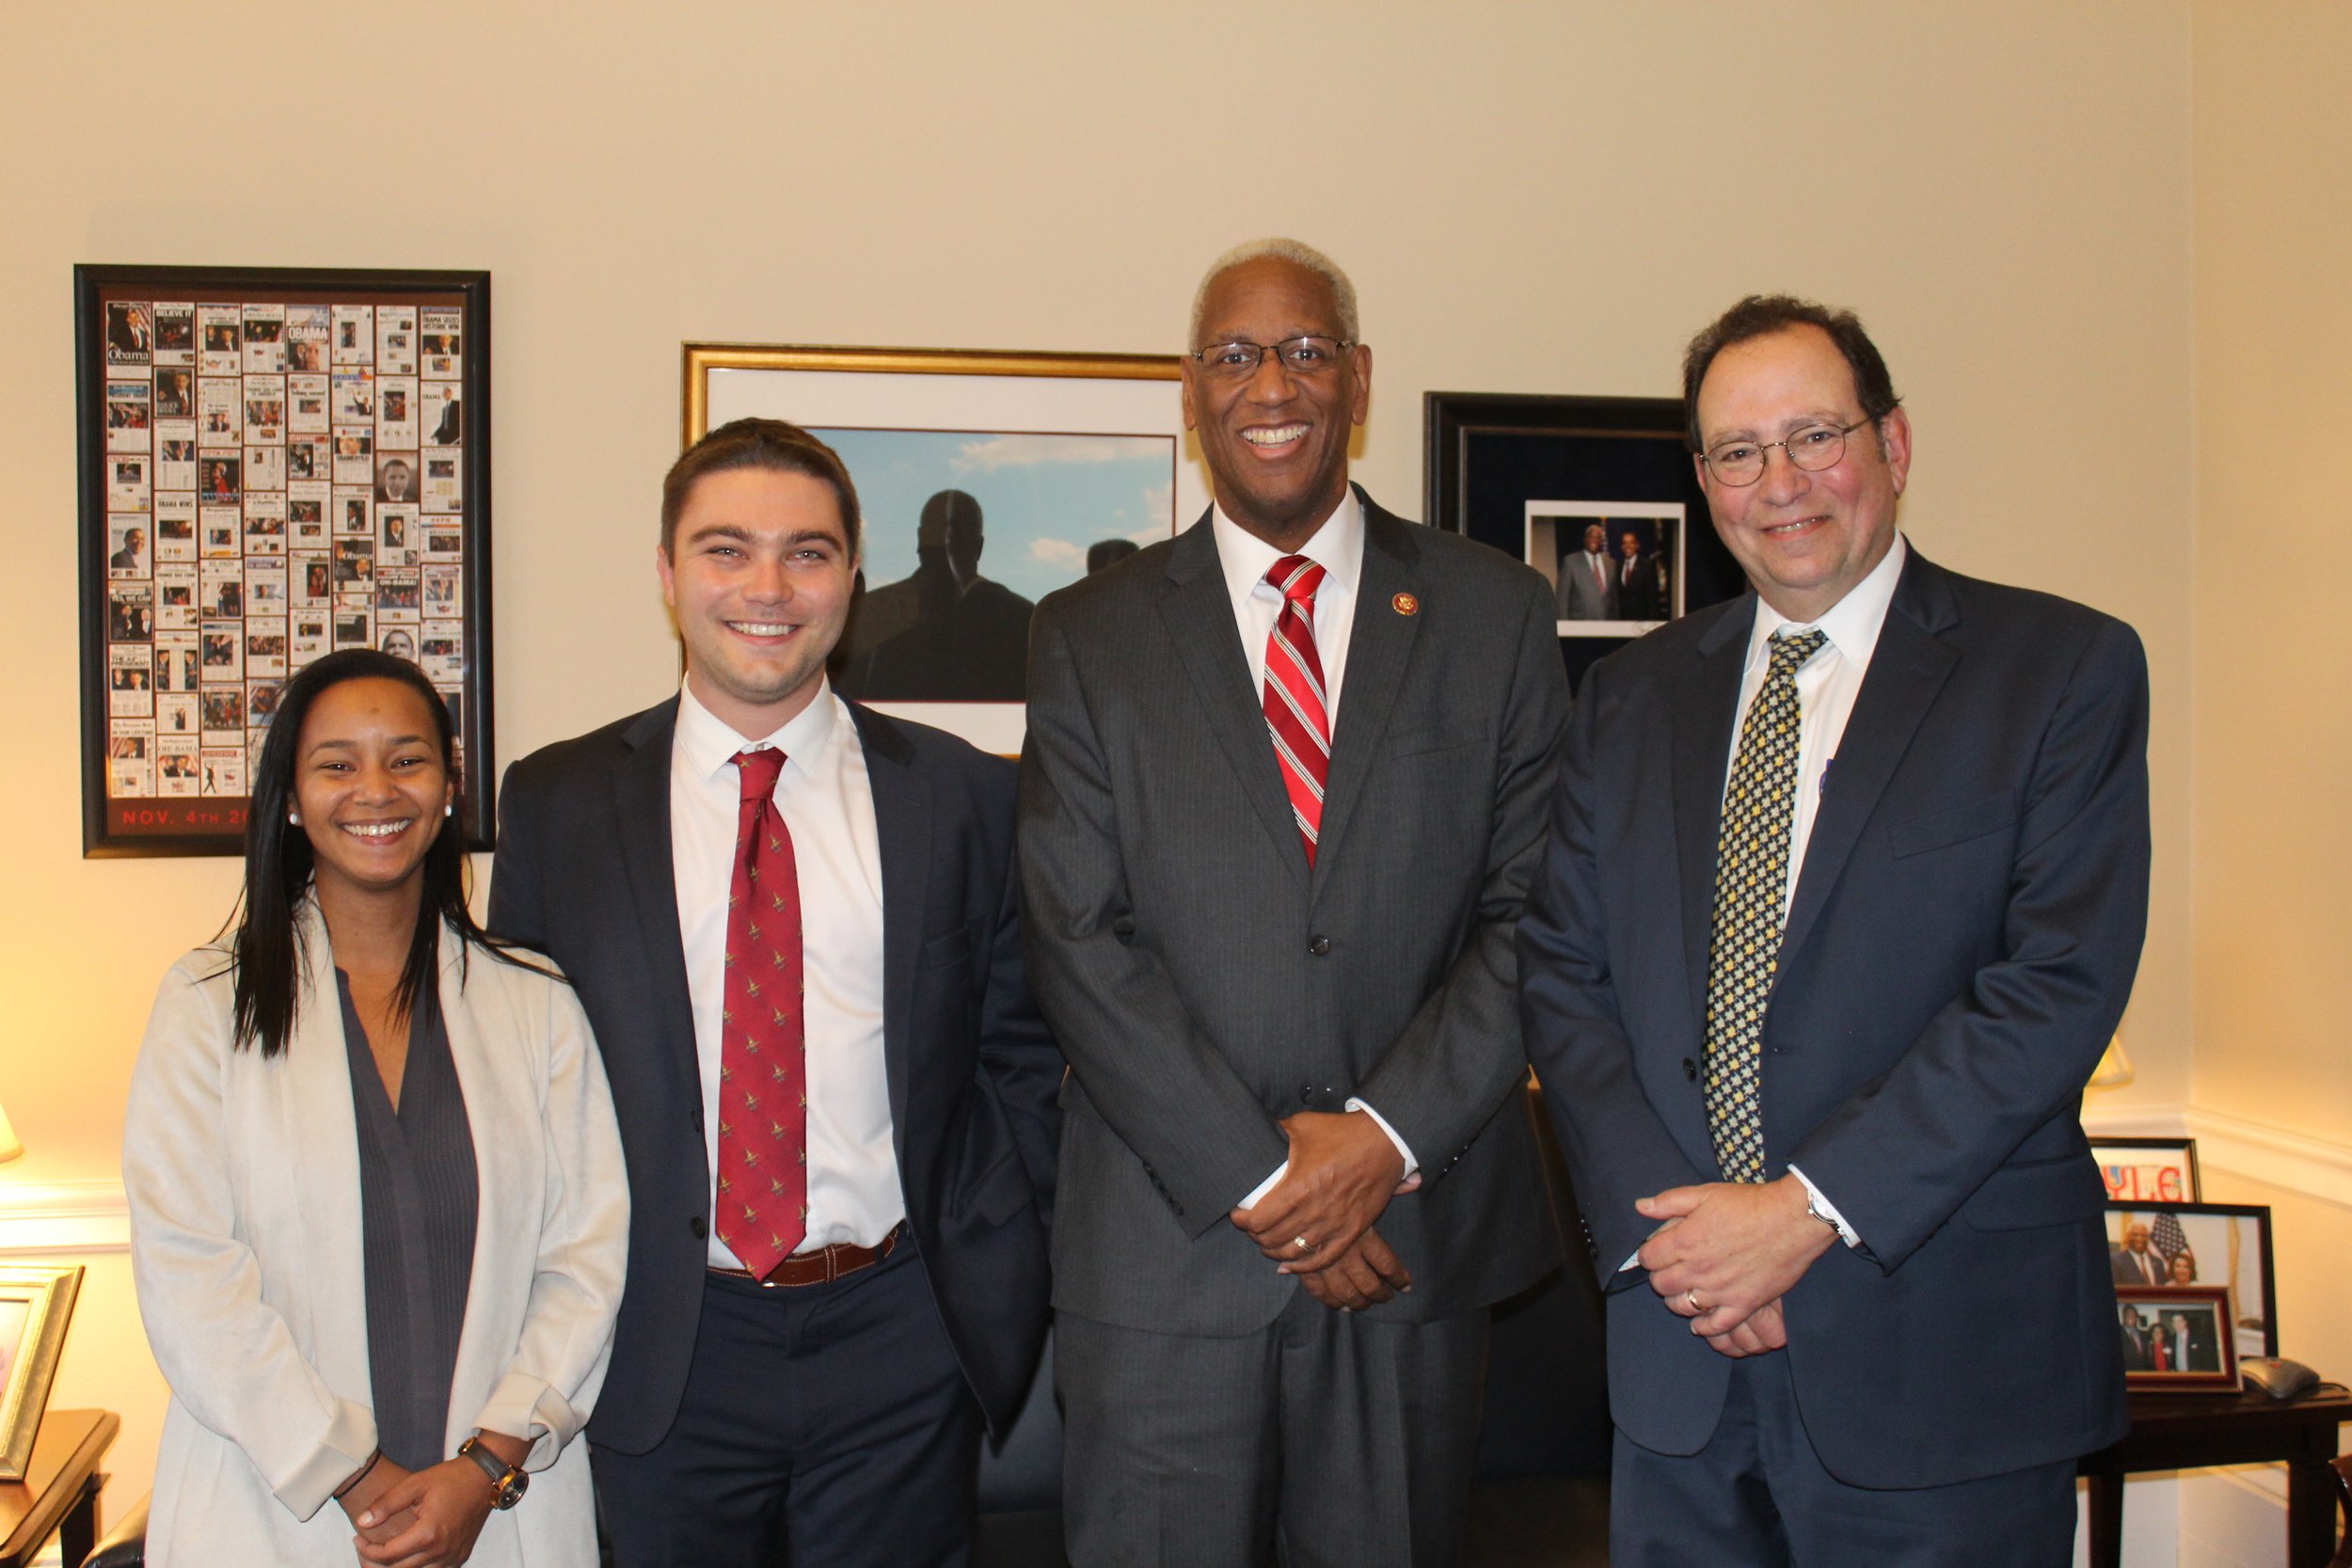  Congressman Donald McEachin with Choose Clean Water Coalition staff and members on the first day of Congress, Jan 3, 2019. 